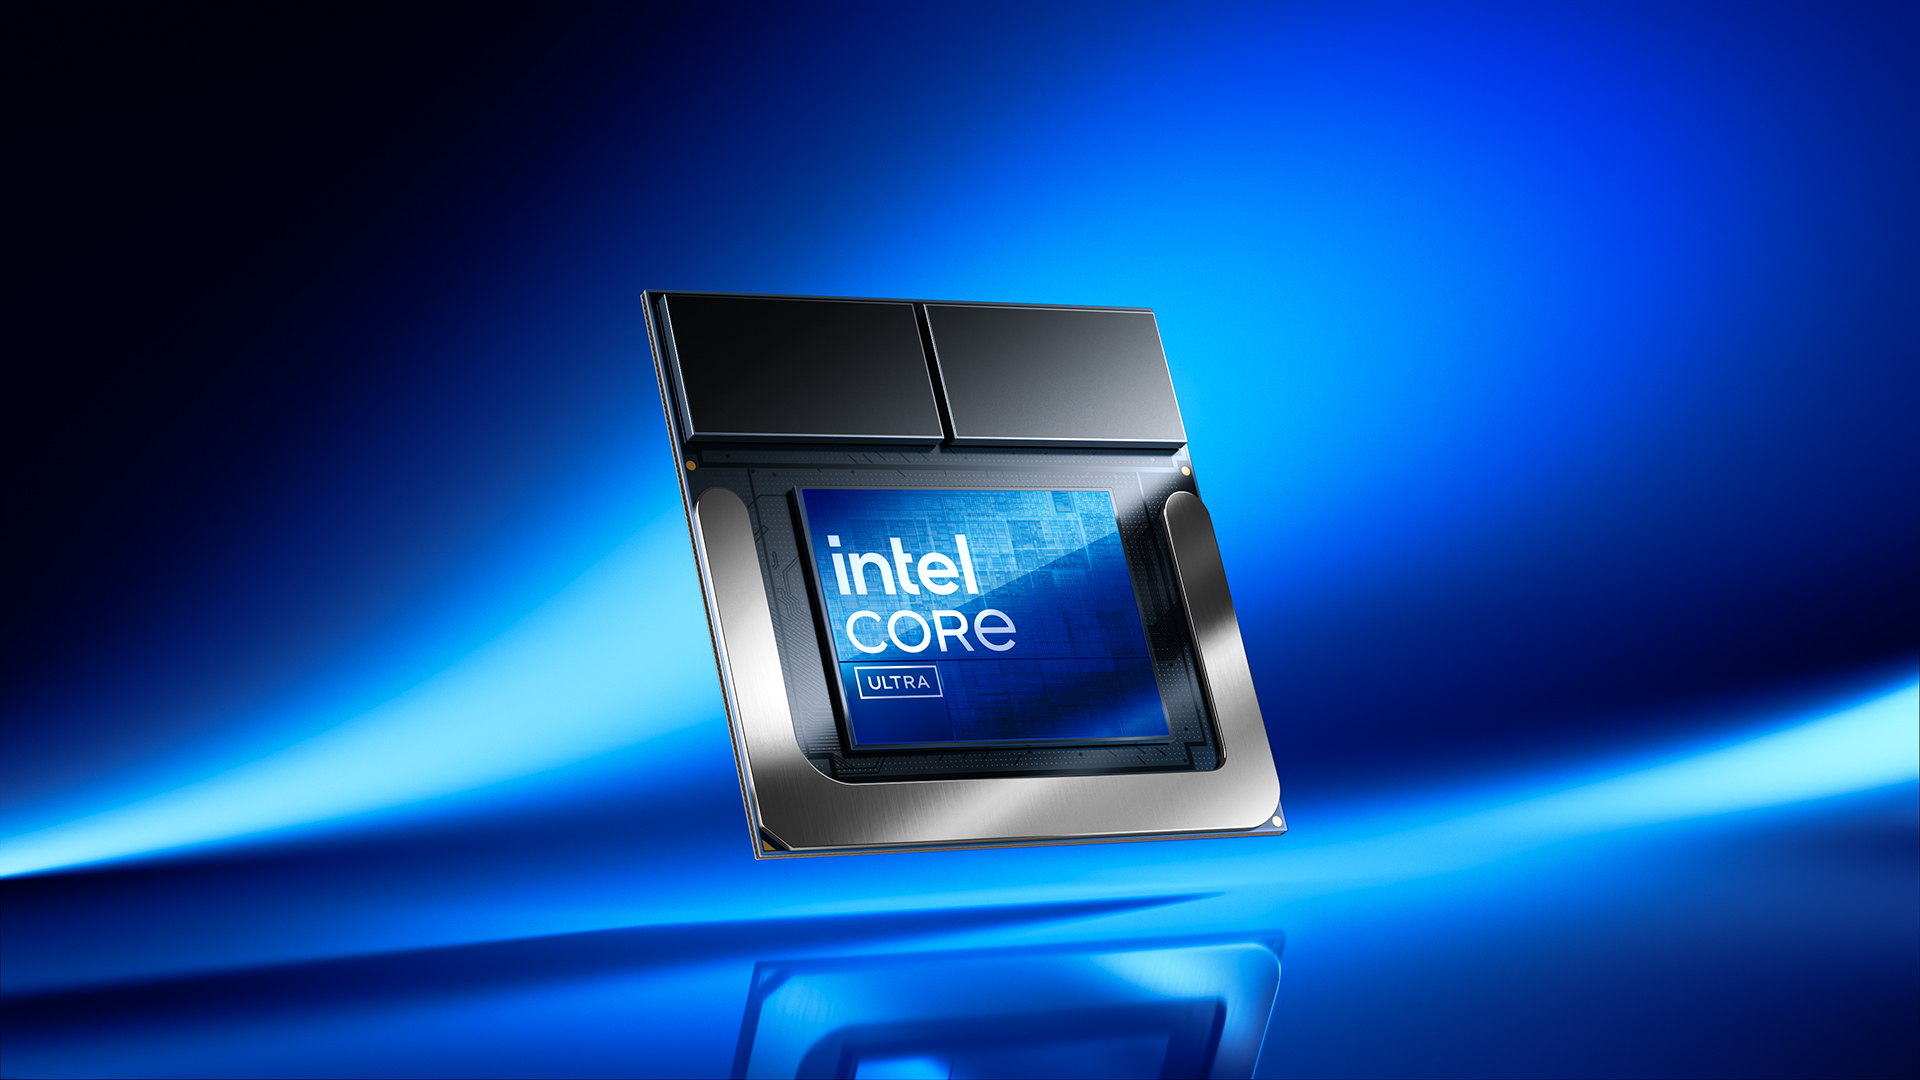 Intel promises a revolution in performance and power efficiency in new Lunar Lake mobile processors